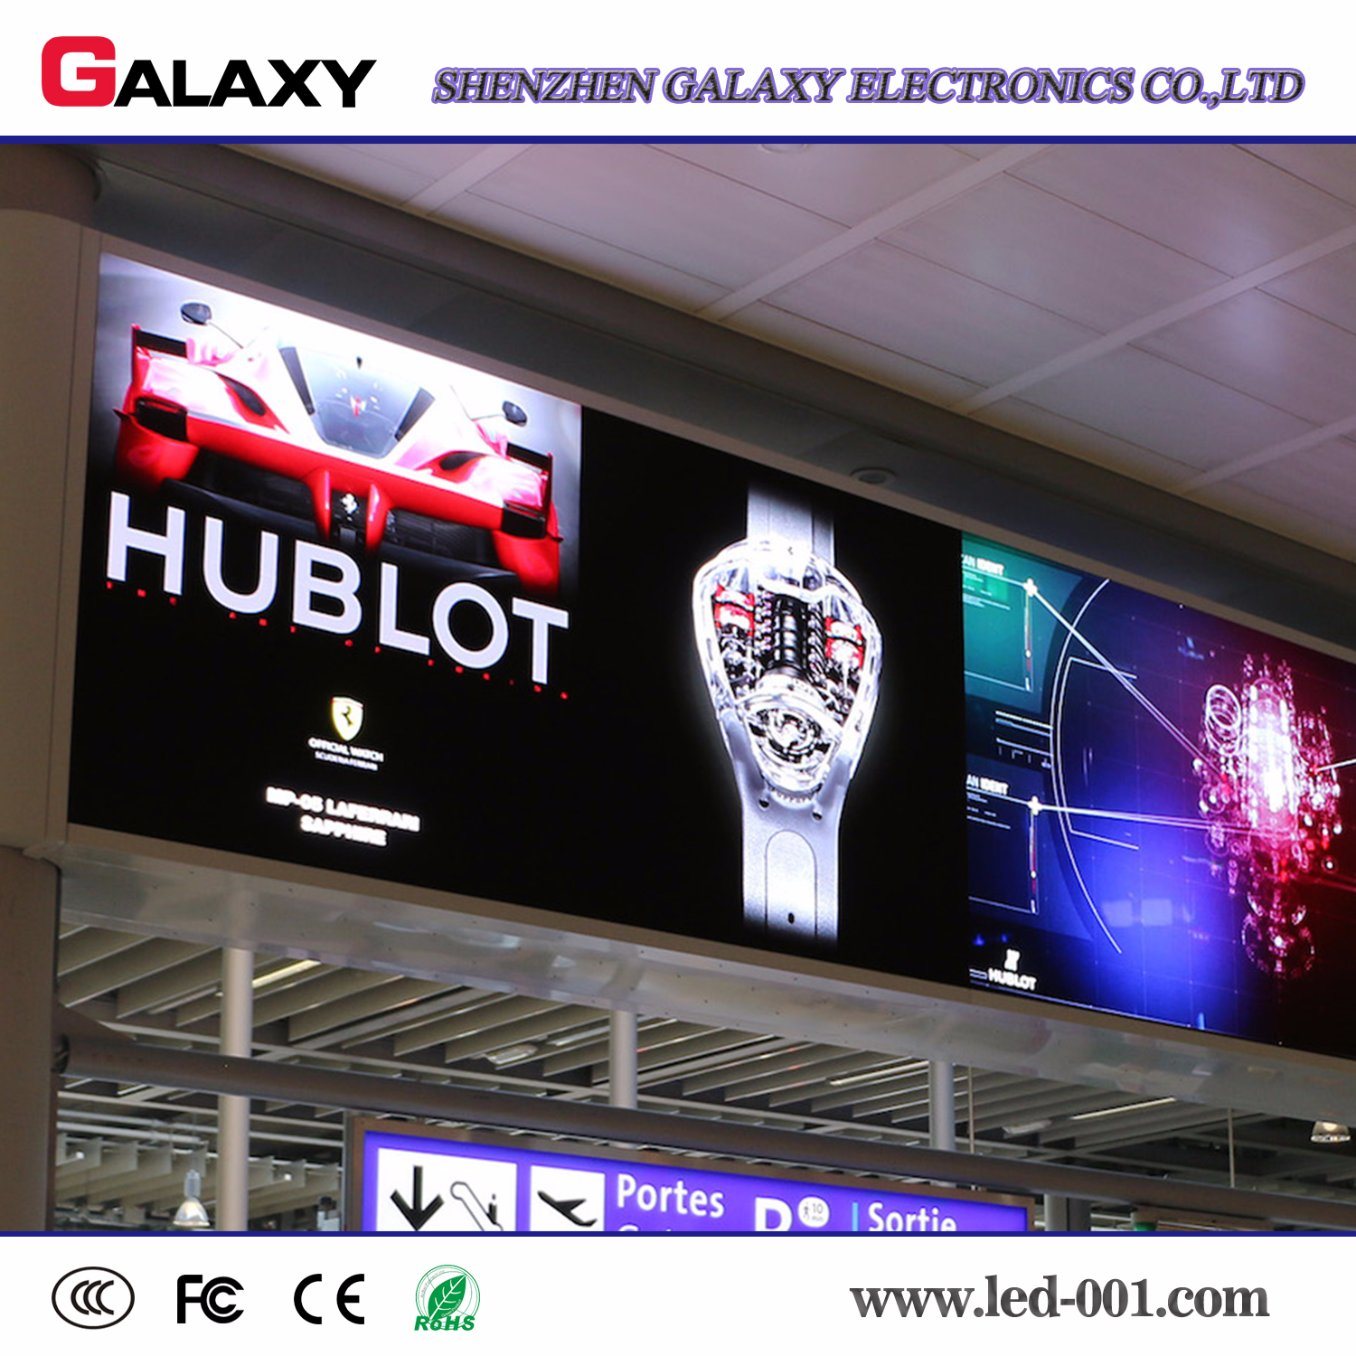 Die-Casting Fixed Full Color Indoor LED Display Screen Video Wall for Advertising, Control System, Shopping Building